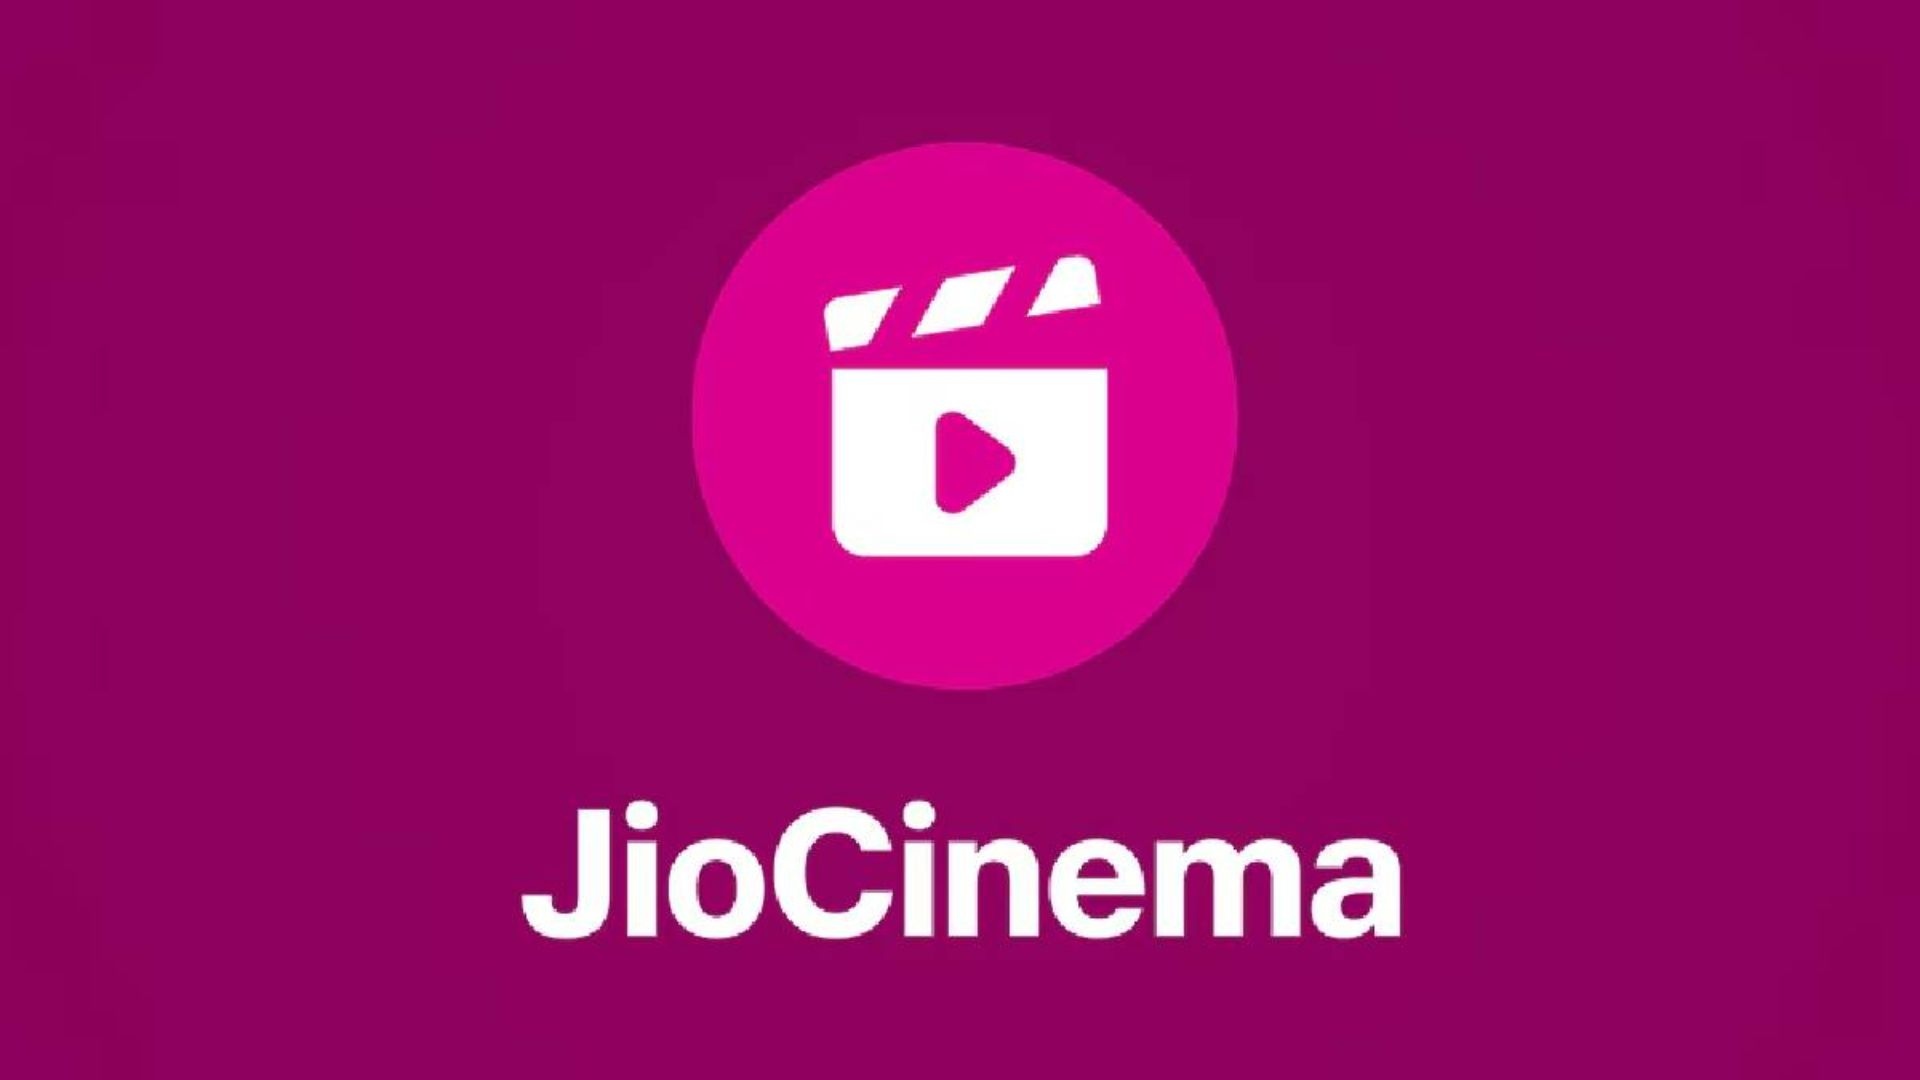 Reliance’s JioCinema launches new budget-friendly monthly subscription plan